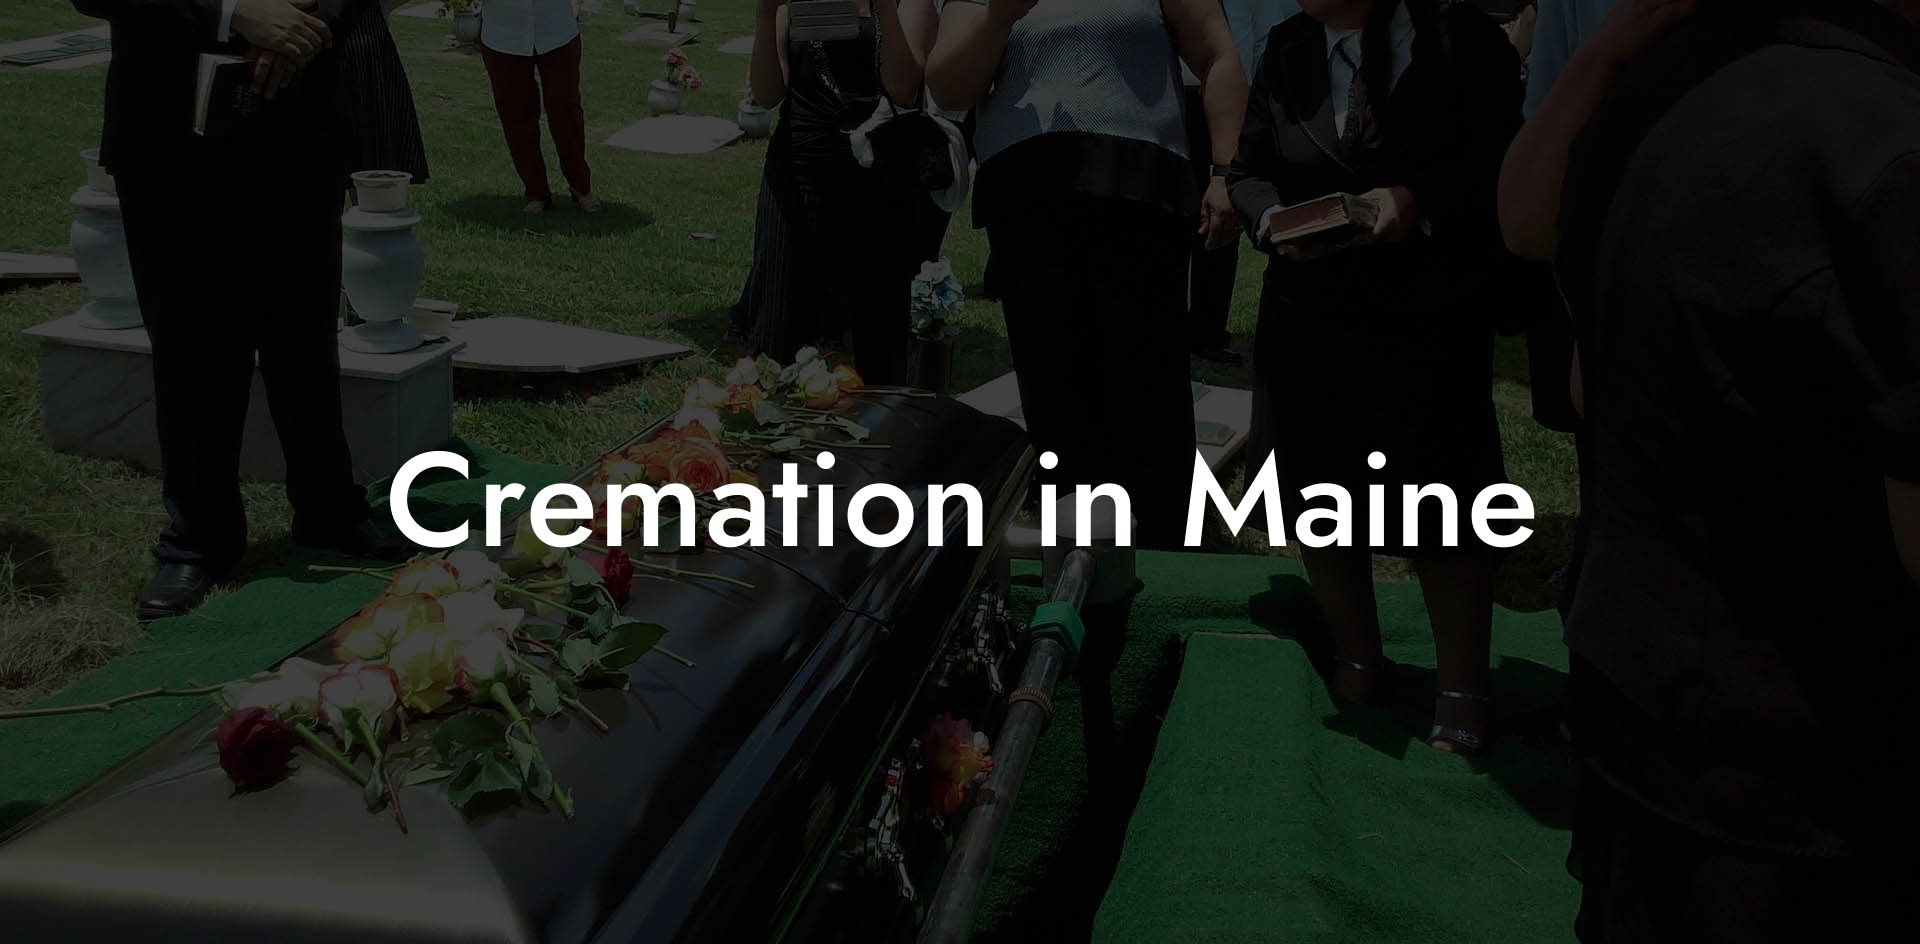 Cremation in Maine